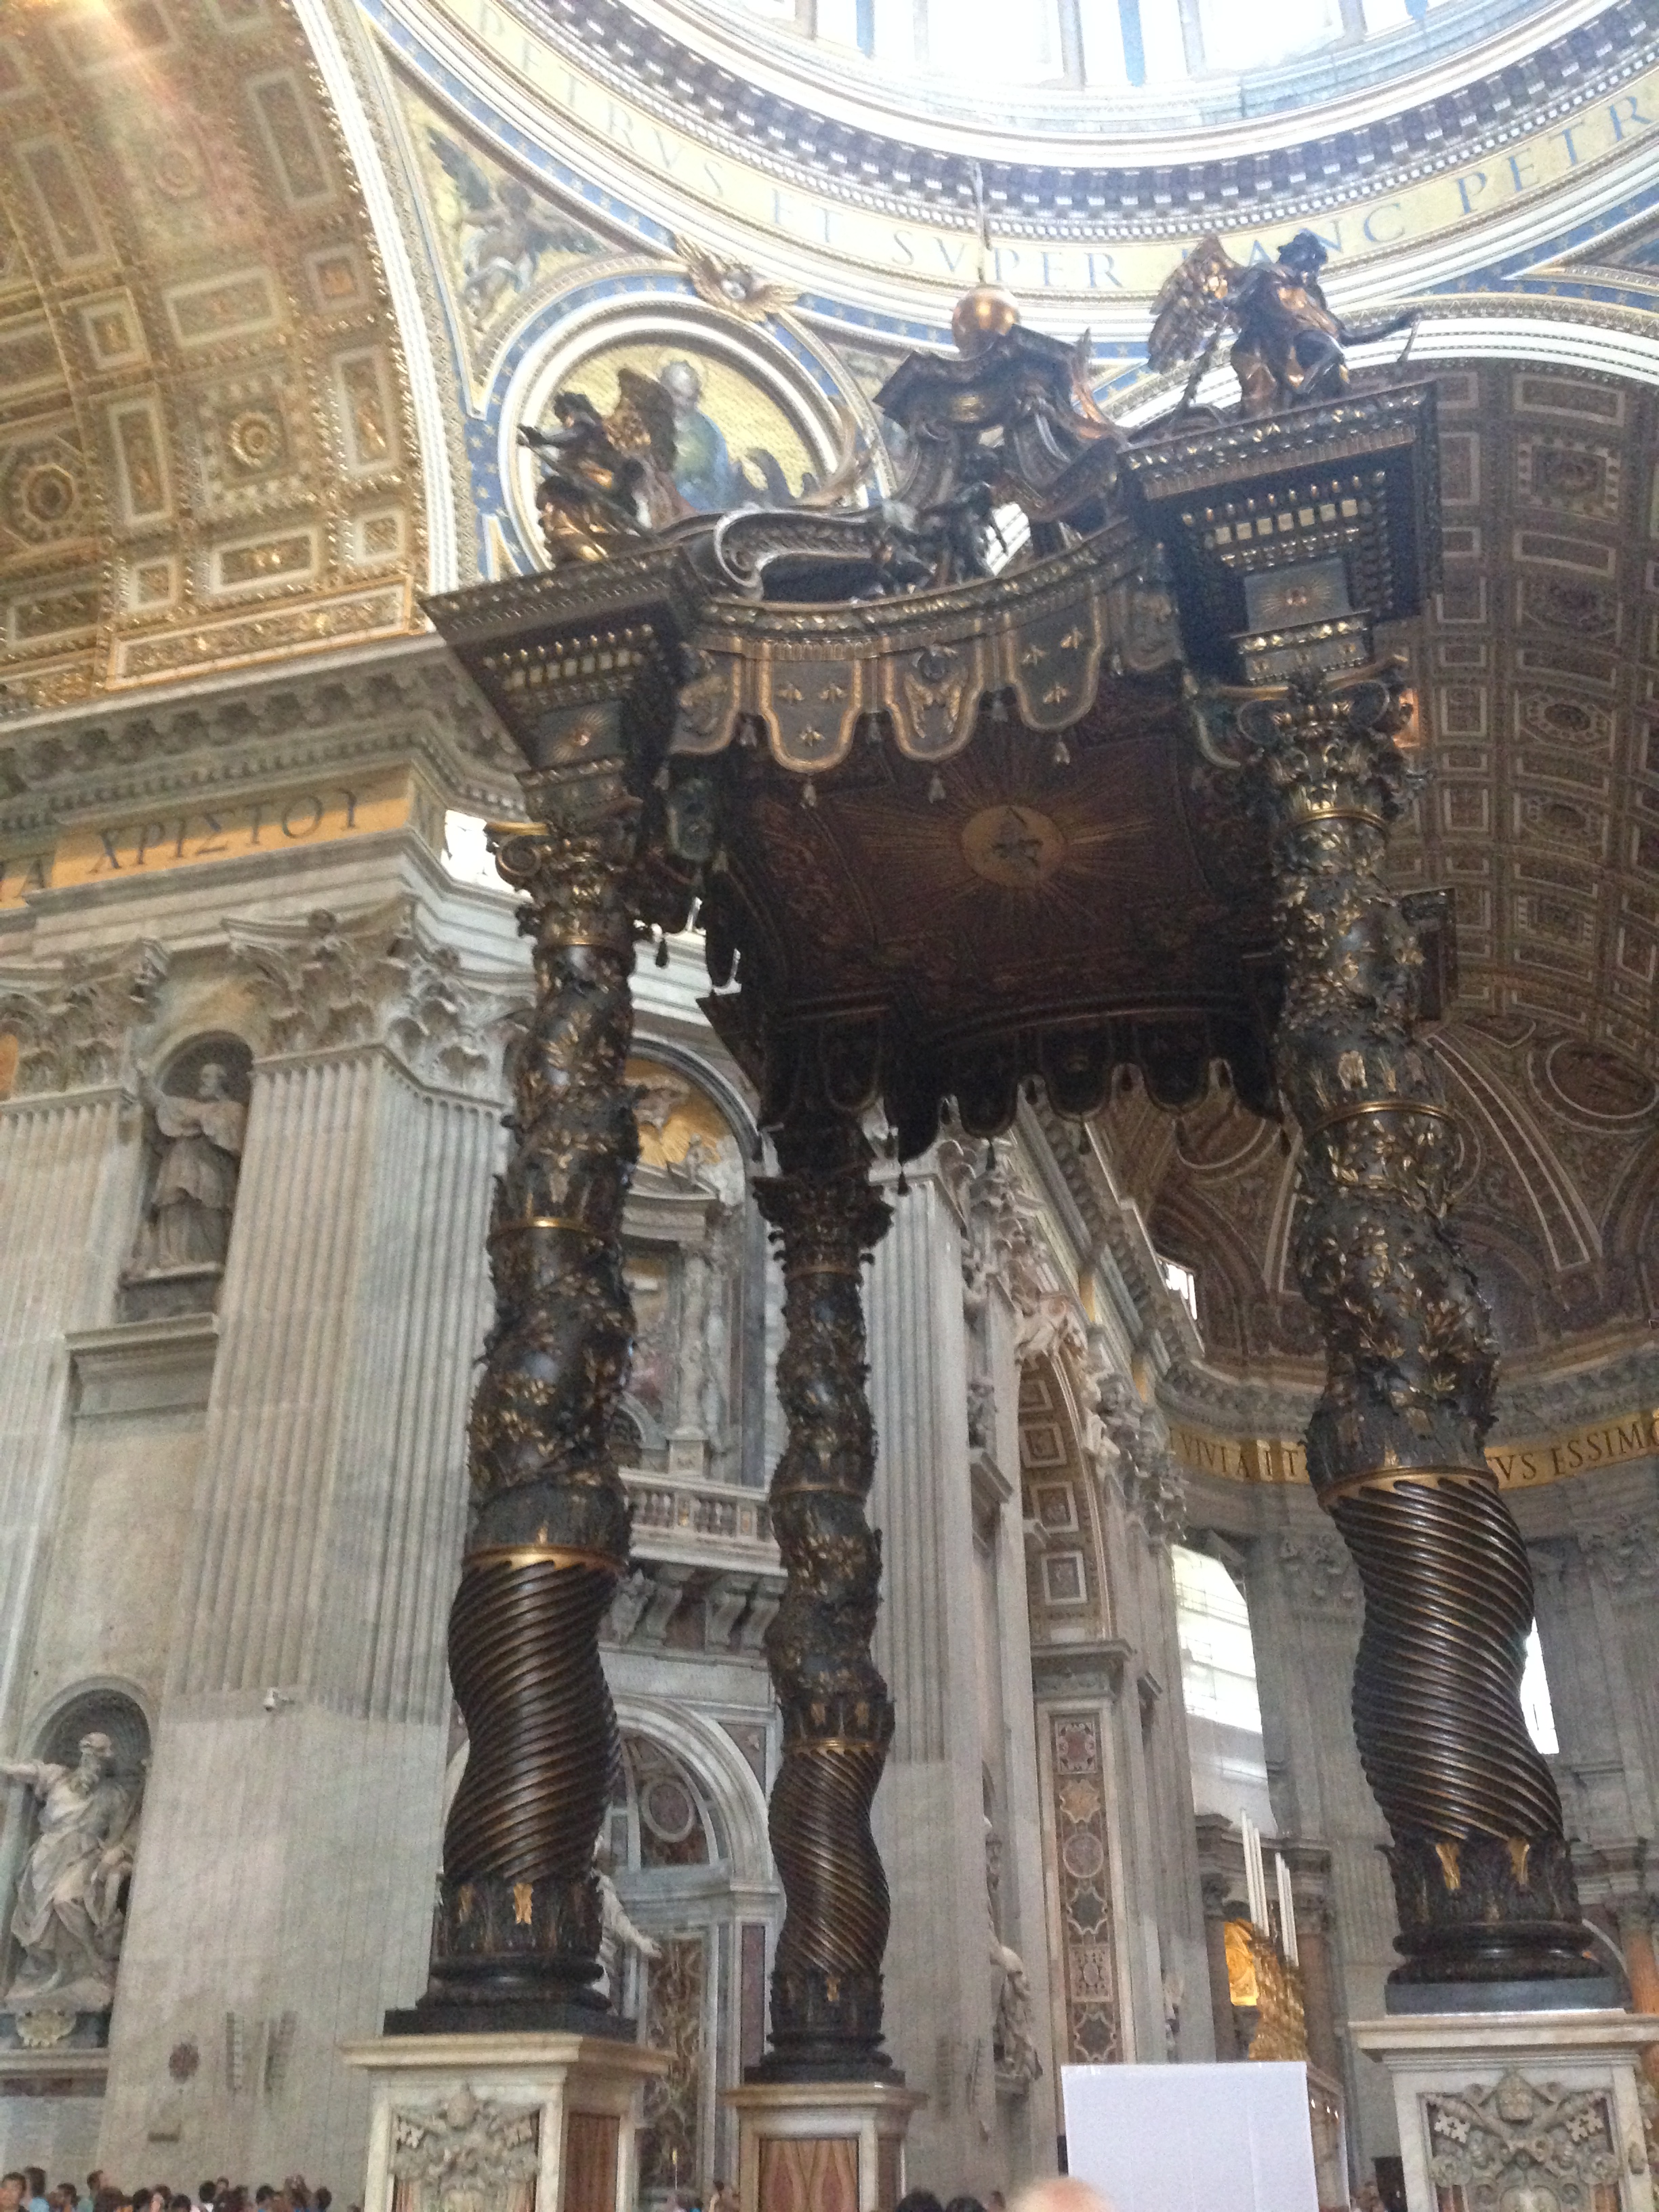 Do you recognize this structure? You can see this different vantage point of the baldacchino located within Saint Peter's Basilica in Rome.